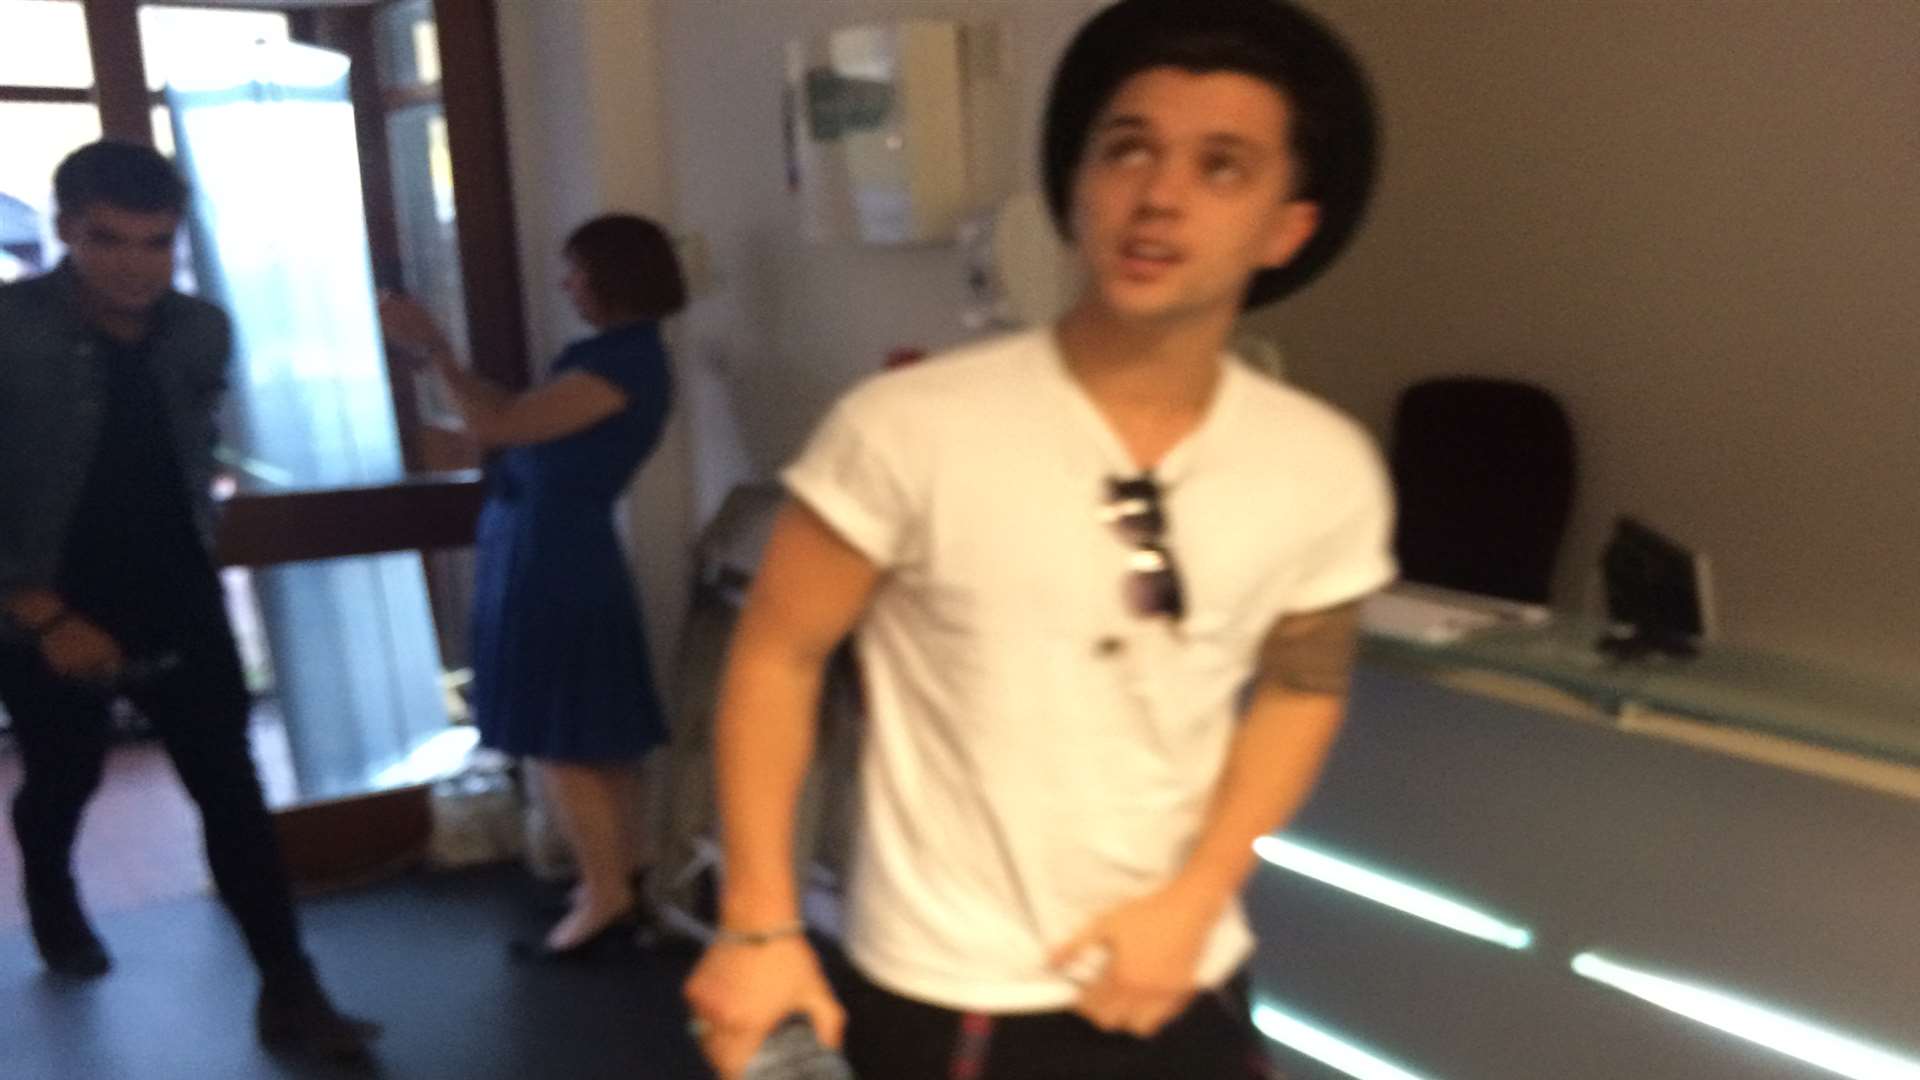 JJ heads into the kmfm office for an interview with Olivia Jones